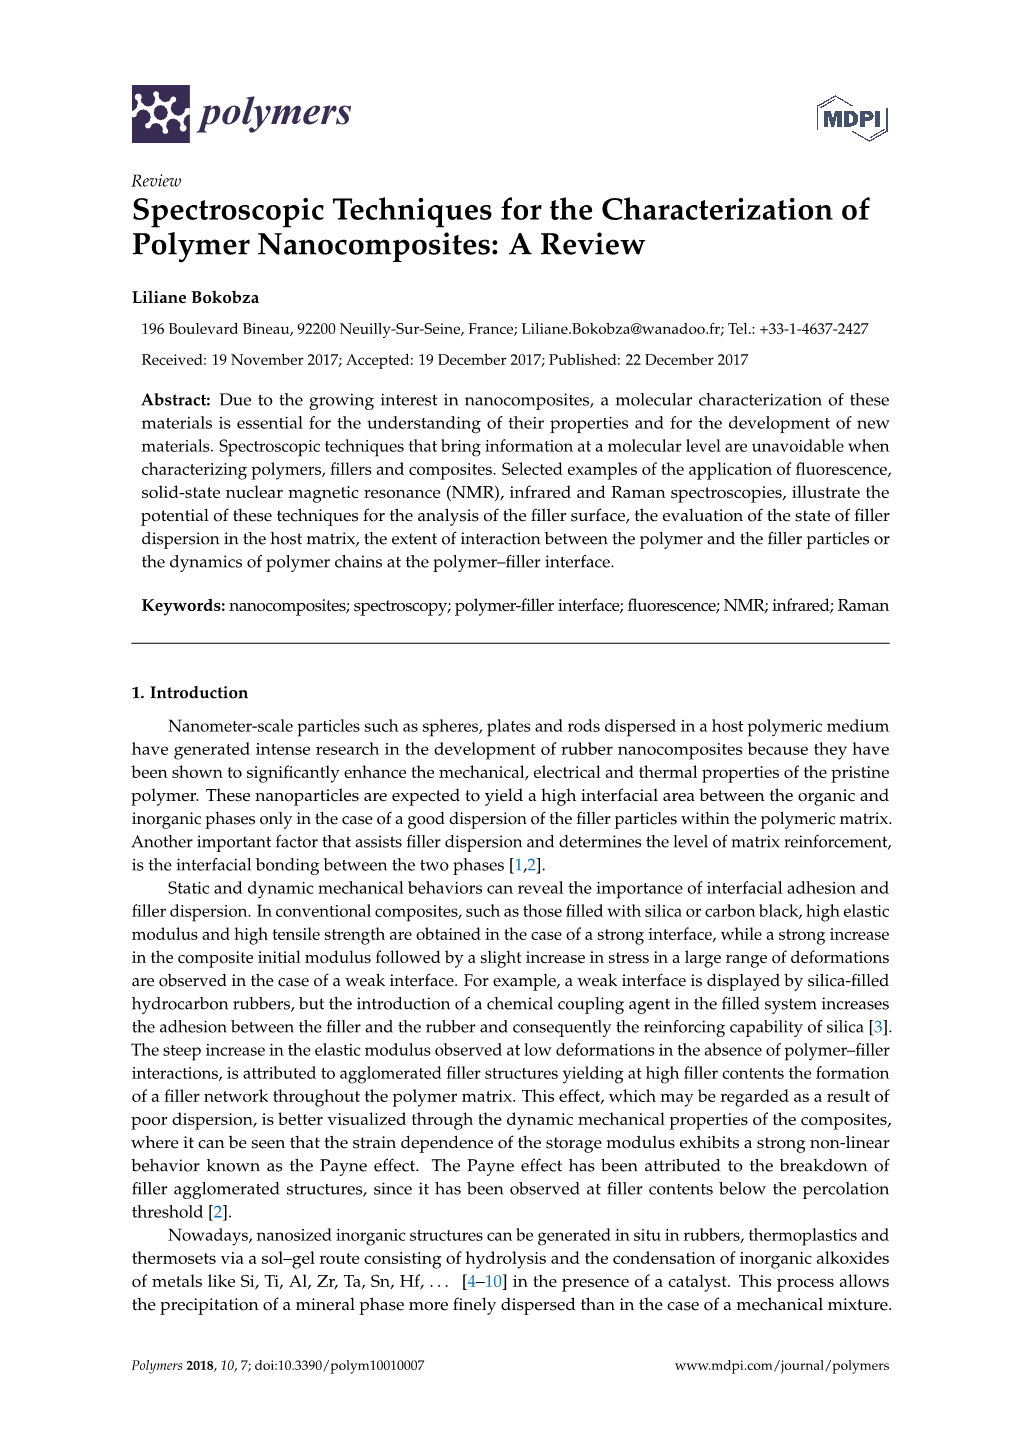 Spectroscopic Techniques for the Characterization of Polymer Nanocomposites: a Review